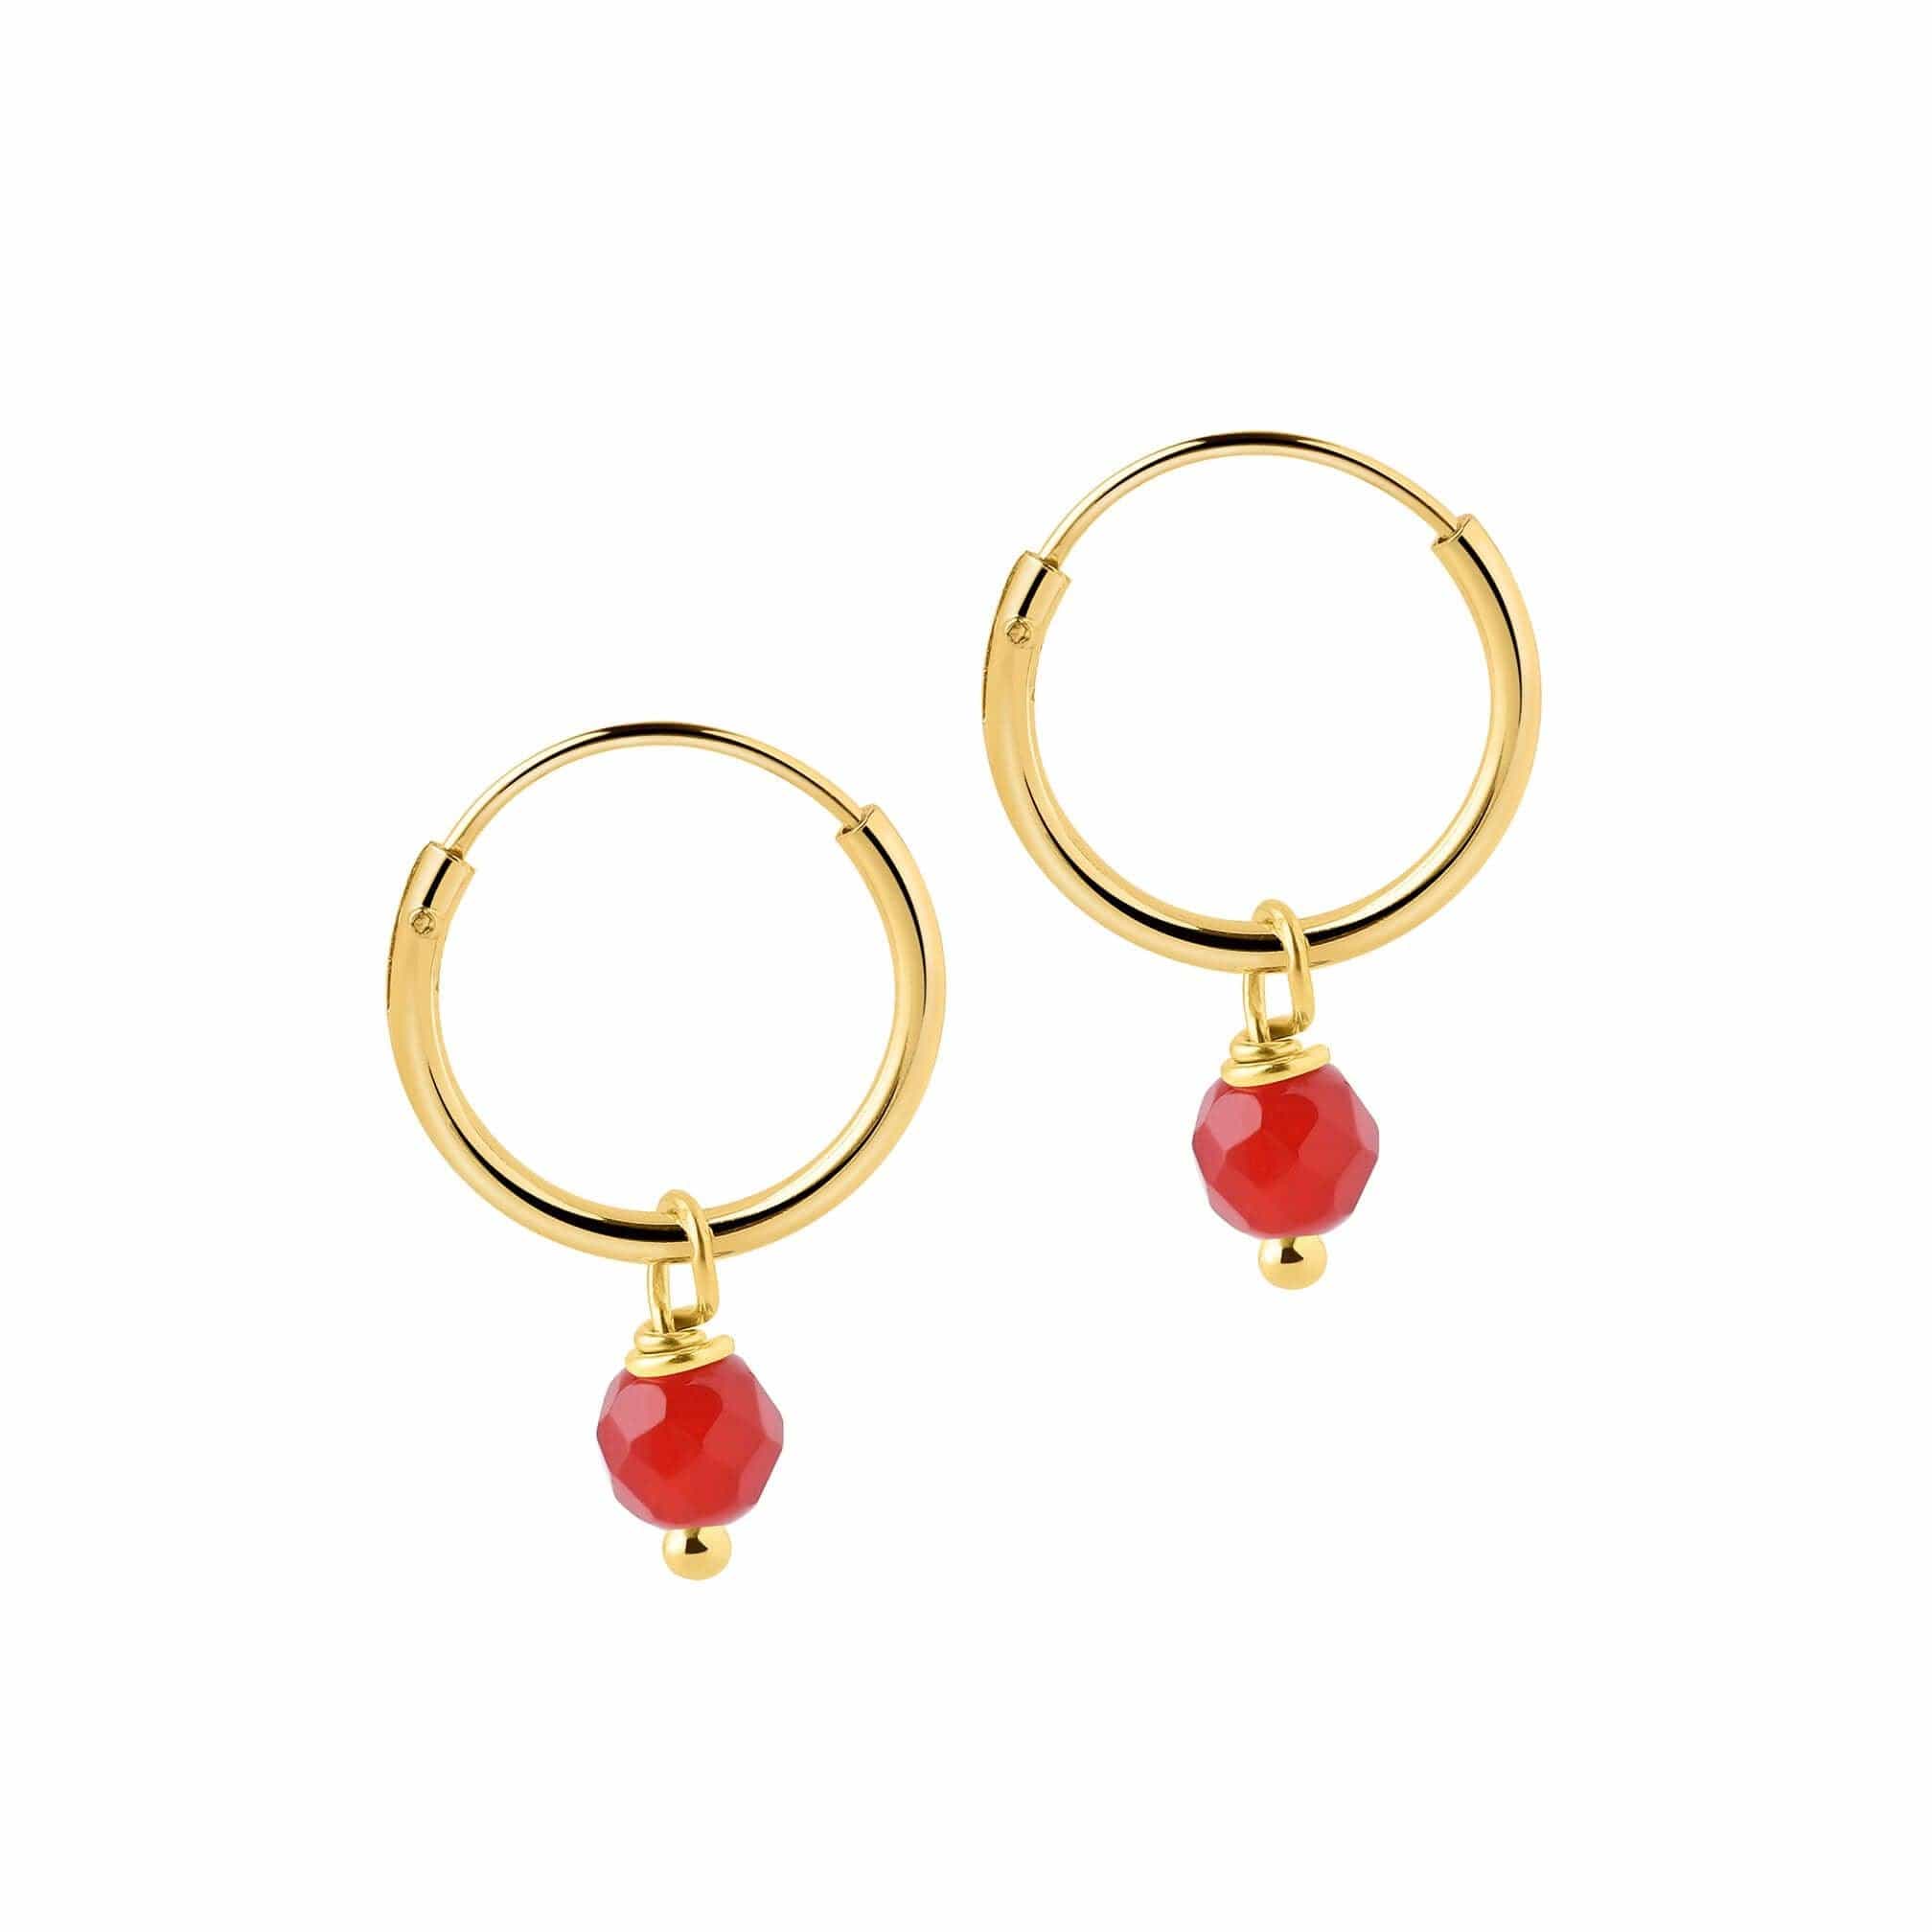 12mm gold plated Hoop Earrings with Red Stone